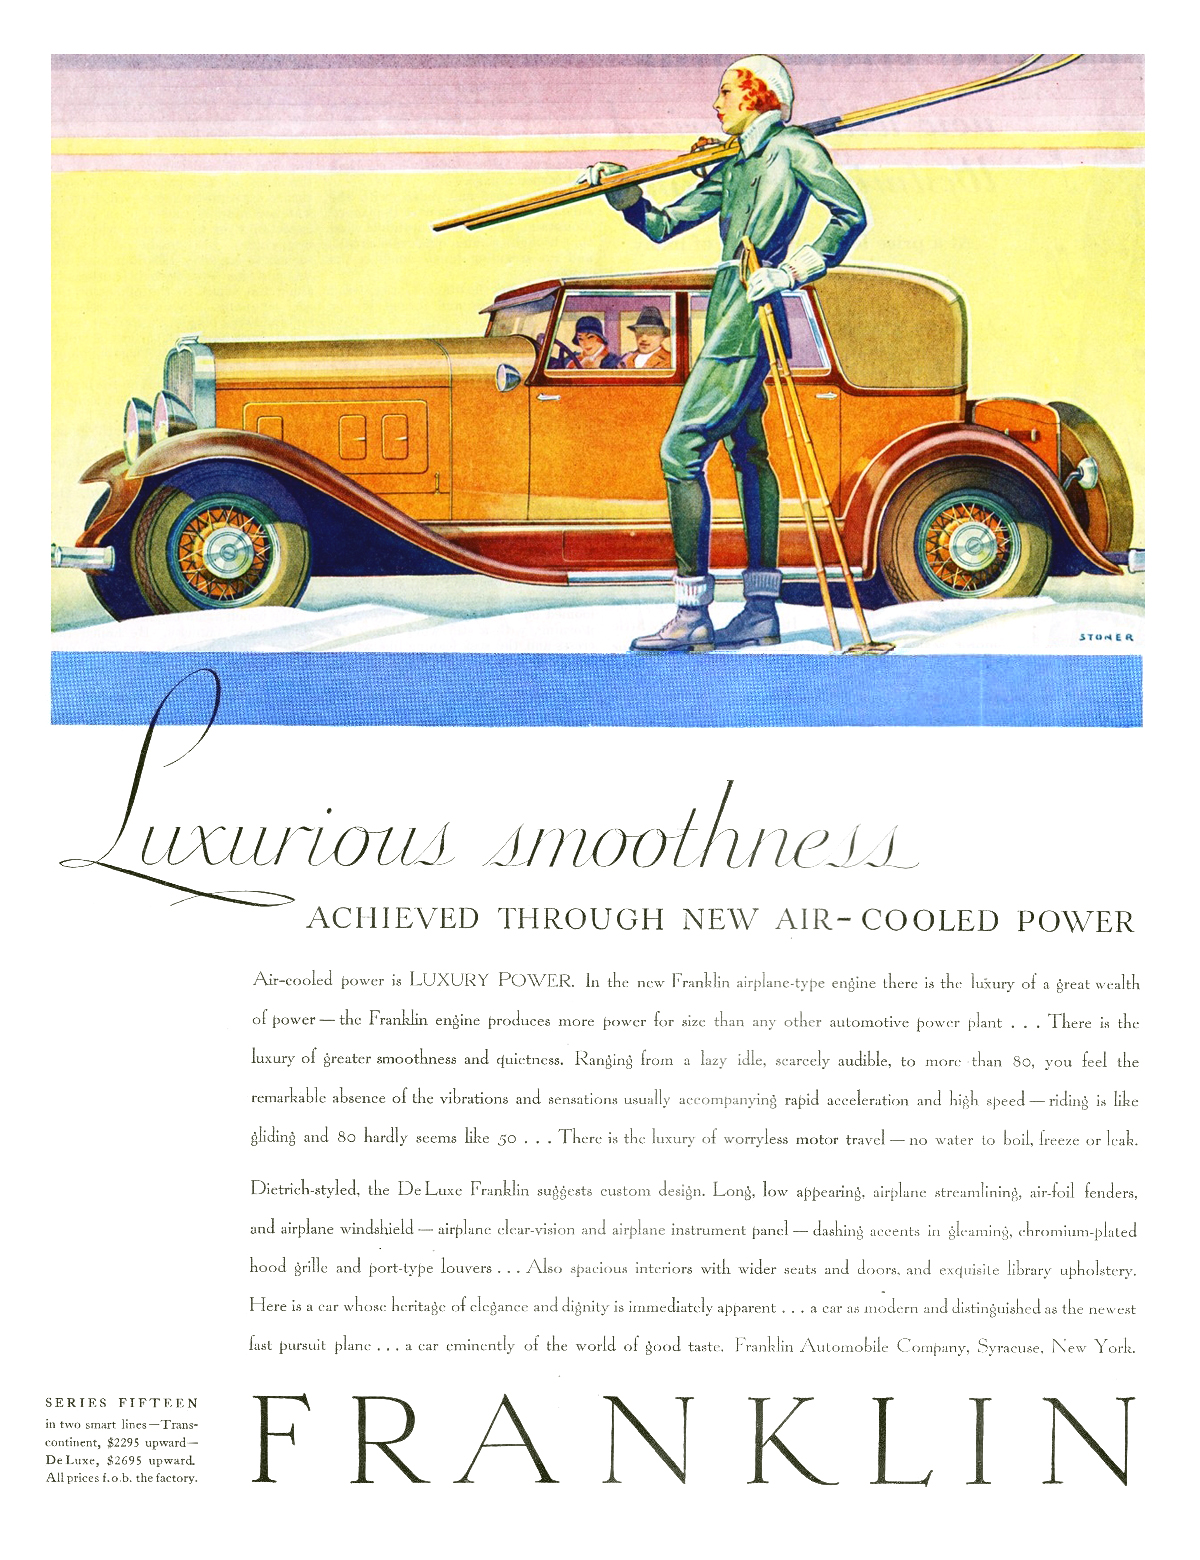 Franklin Series Fifteen DeLuxe Speedster Ad (January-February, 1931): Luxurious smoothness - Illustrated by Elmer Stoner